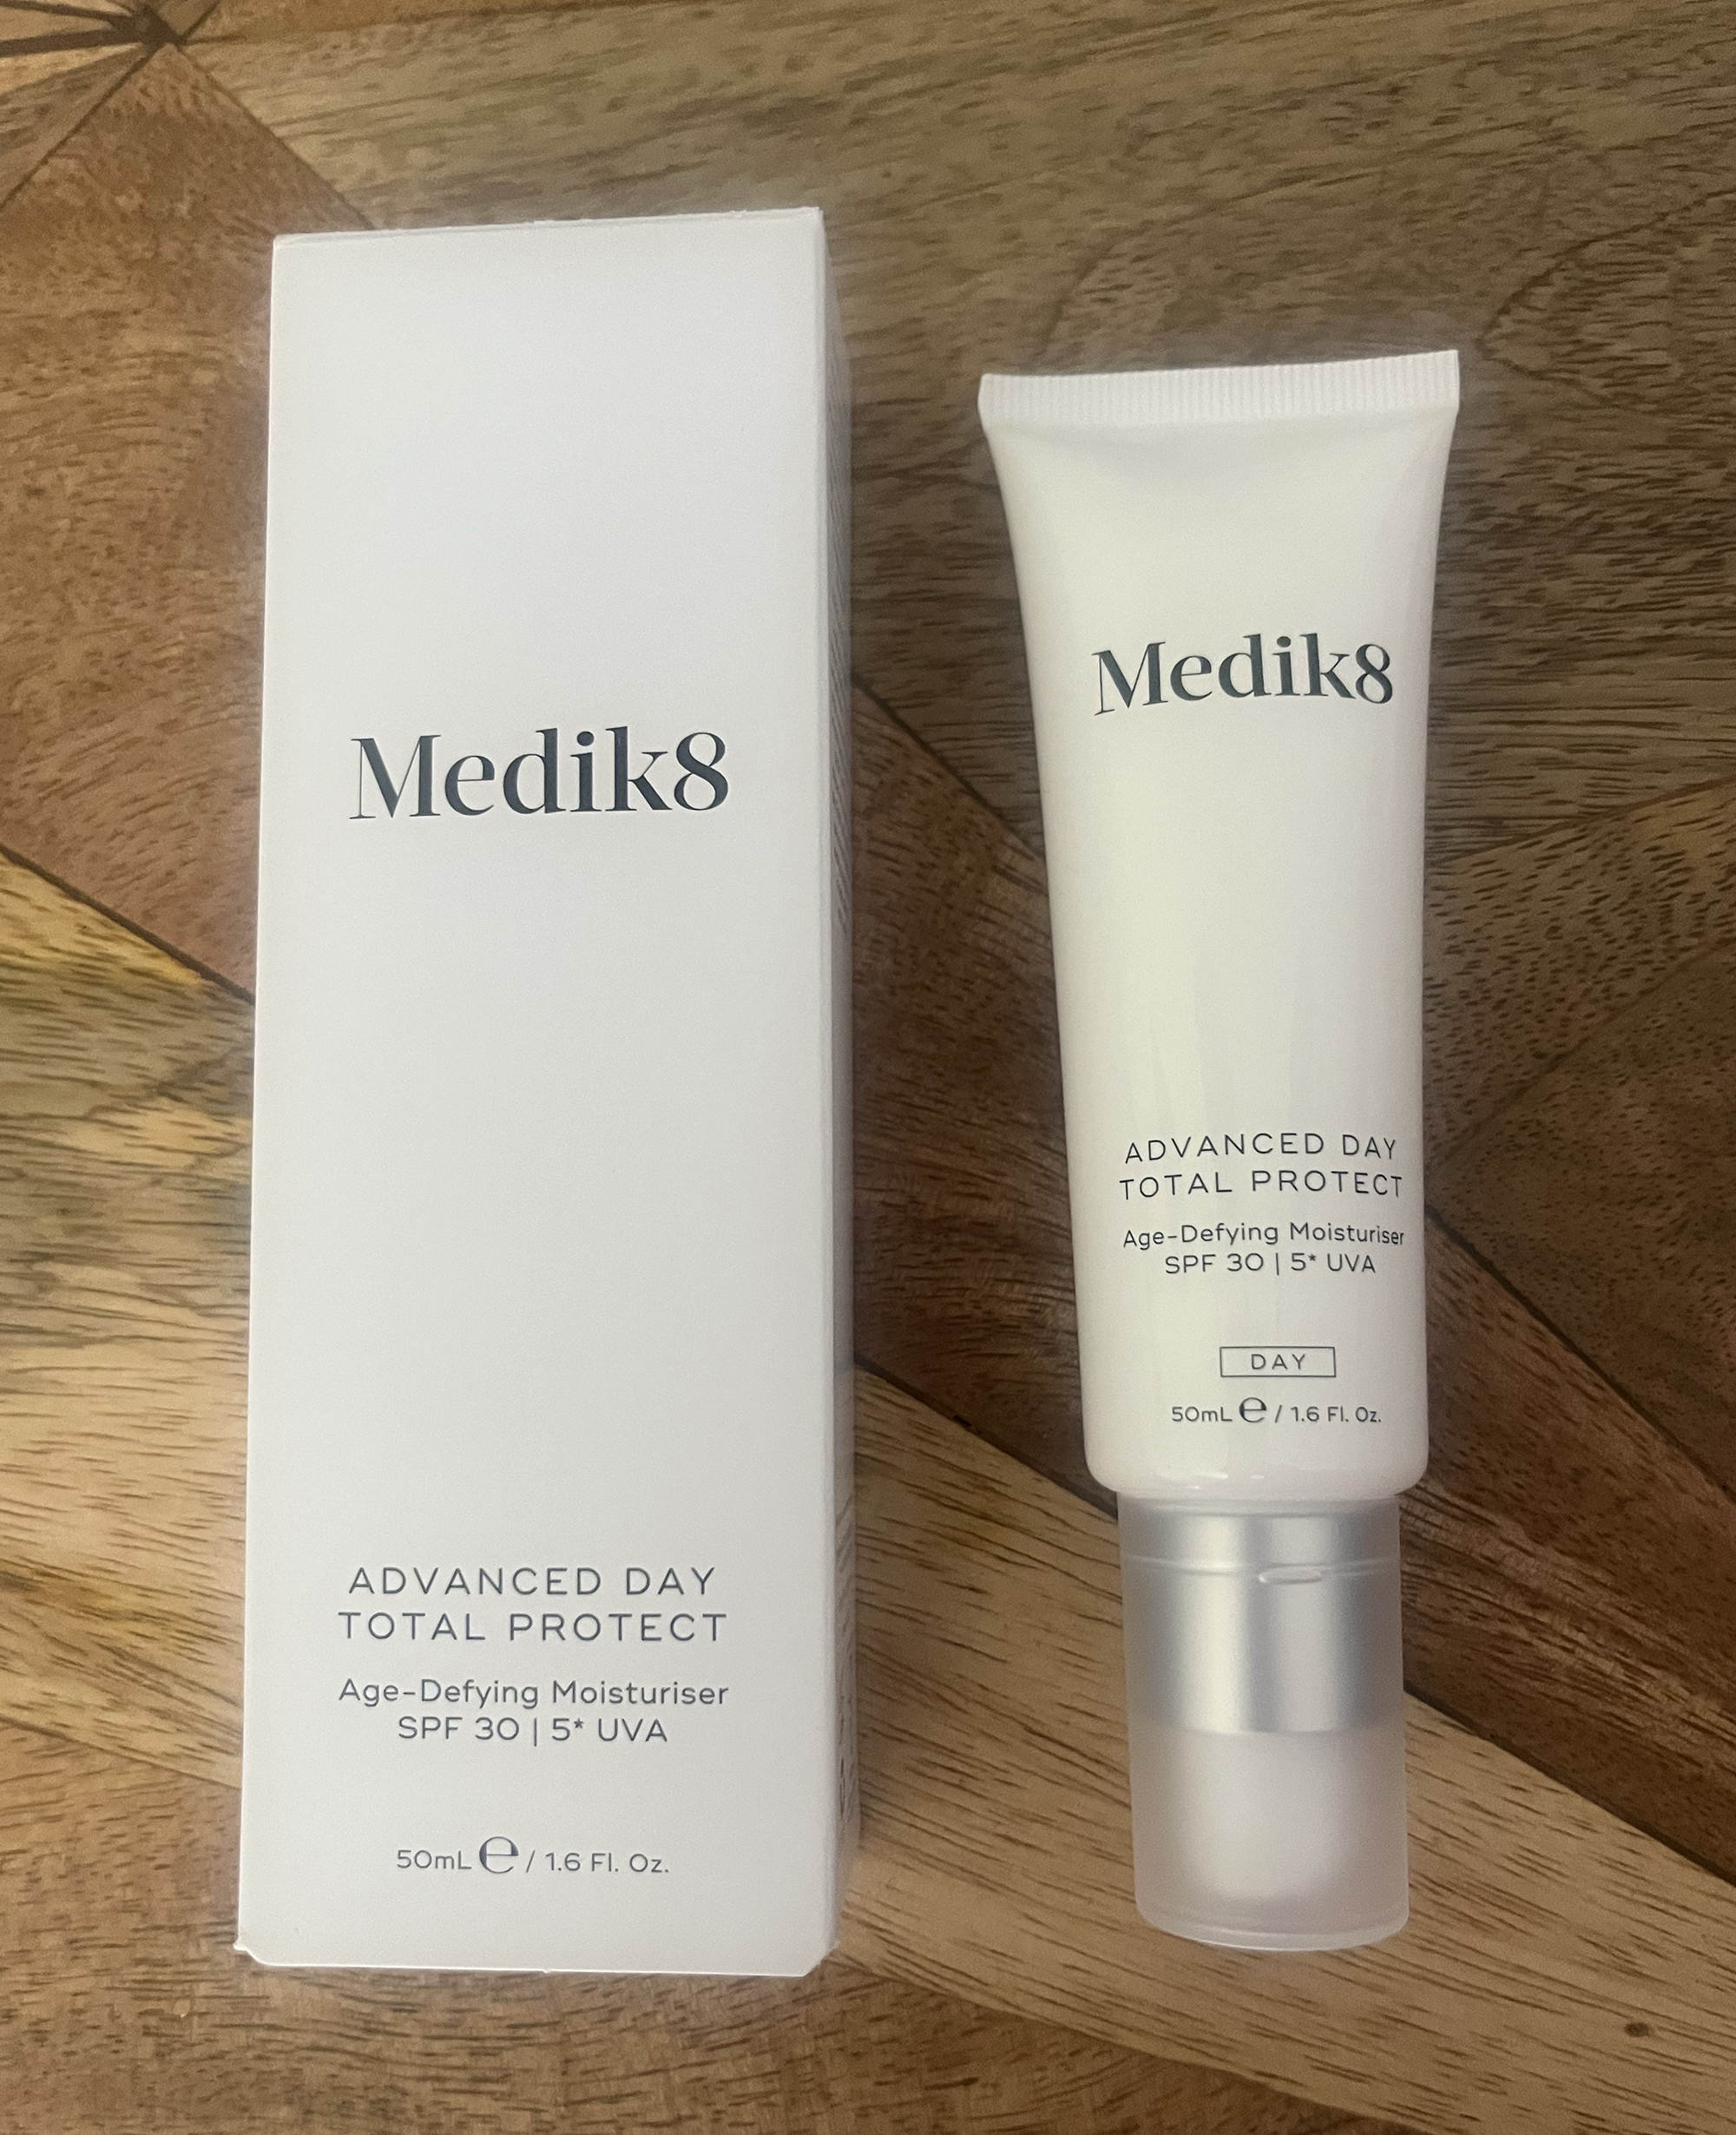 Medik8 works to both treat and protect the skin.